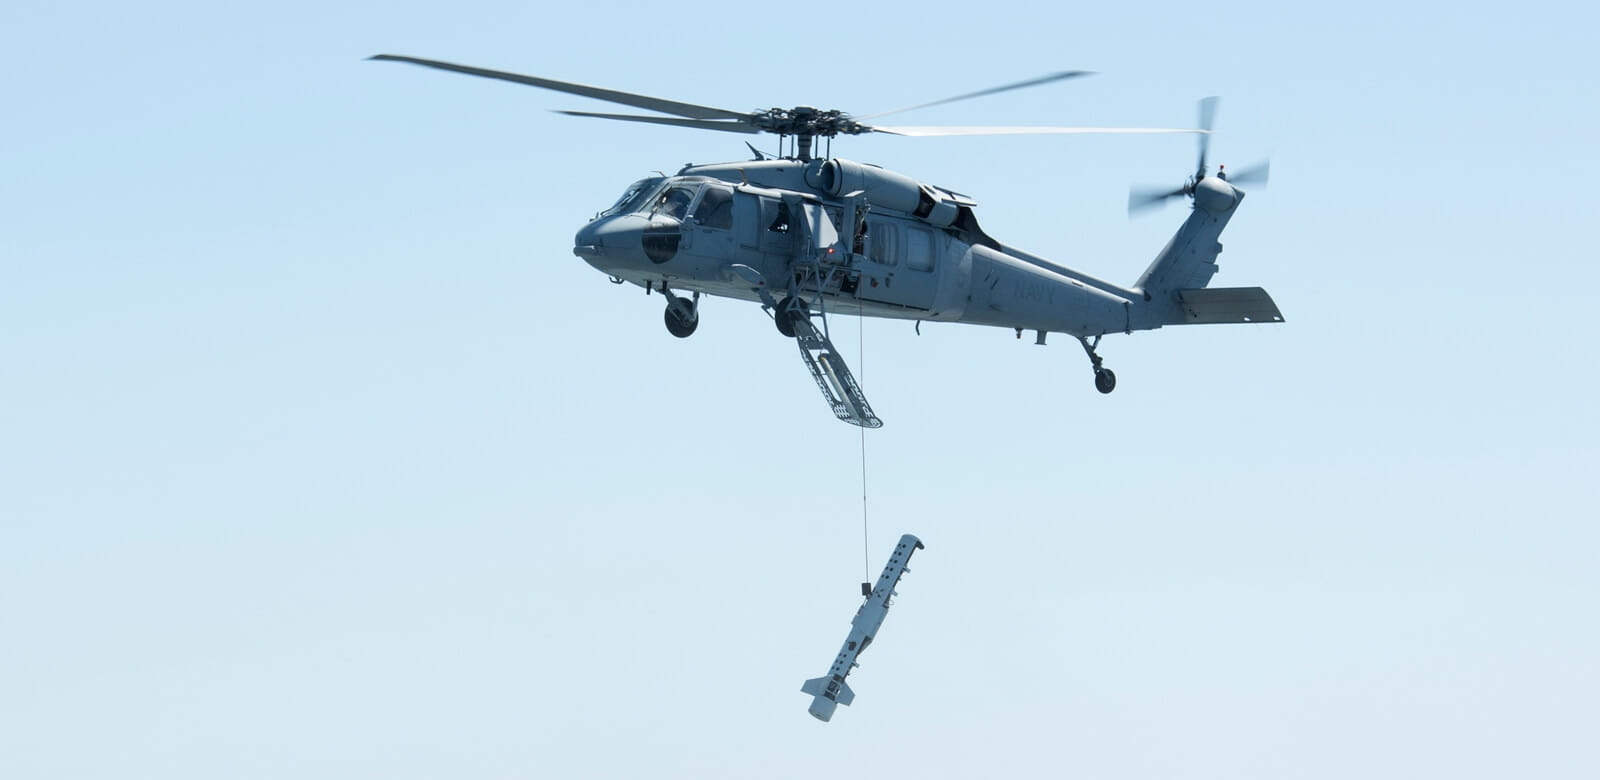 The Airborne Mine Neutralization System deployed from a helicopter. (Photo: US Navy)